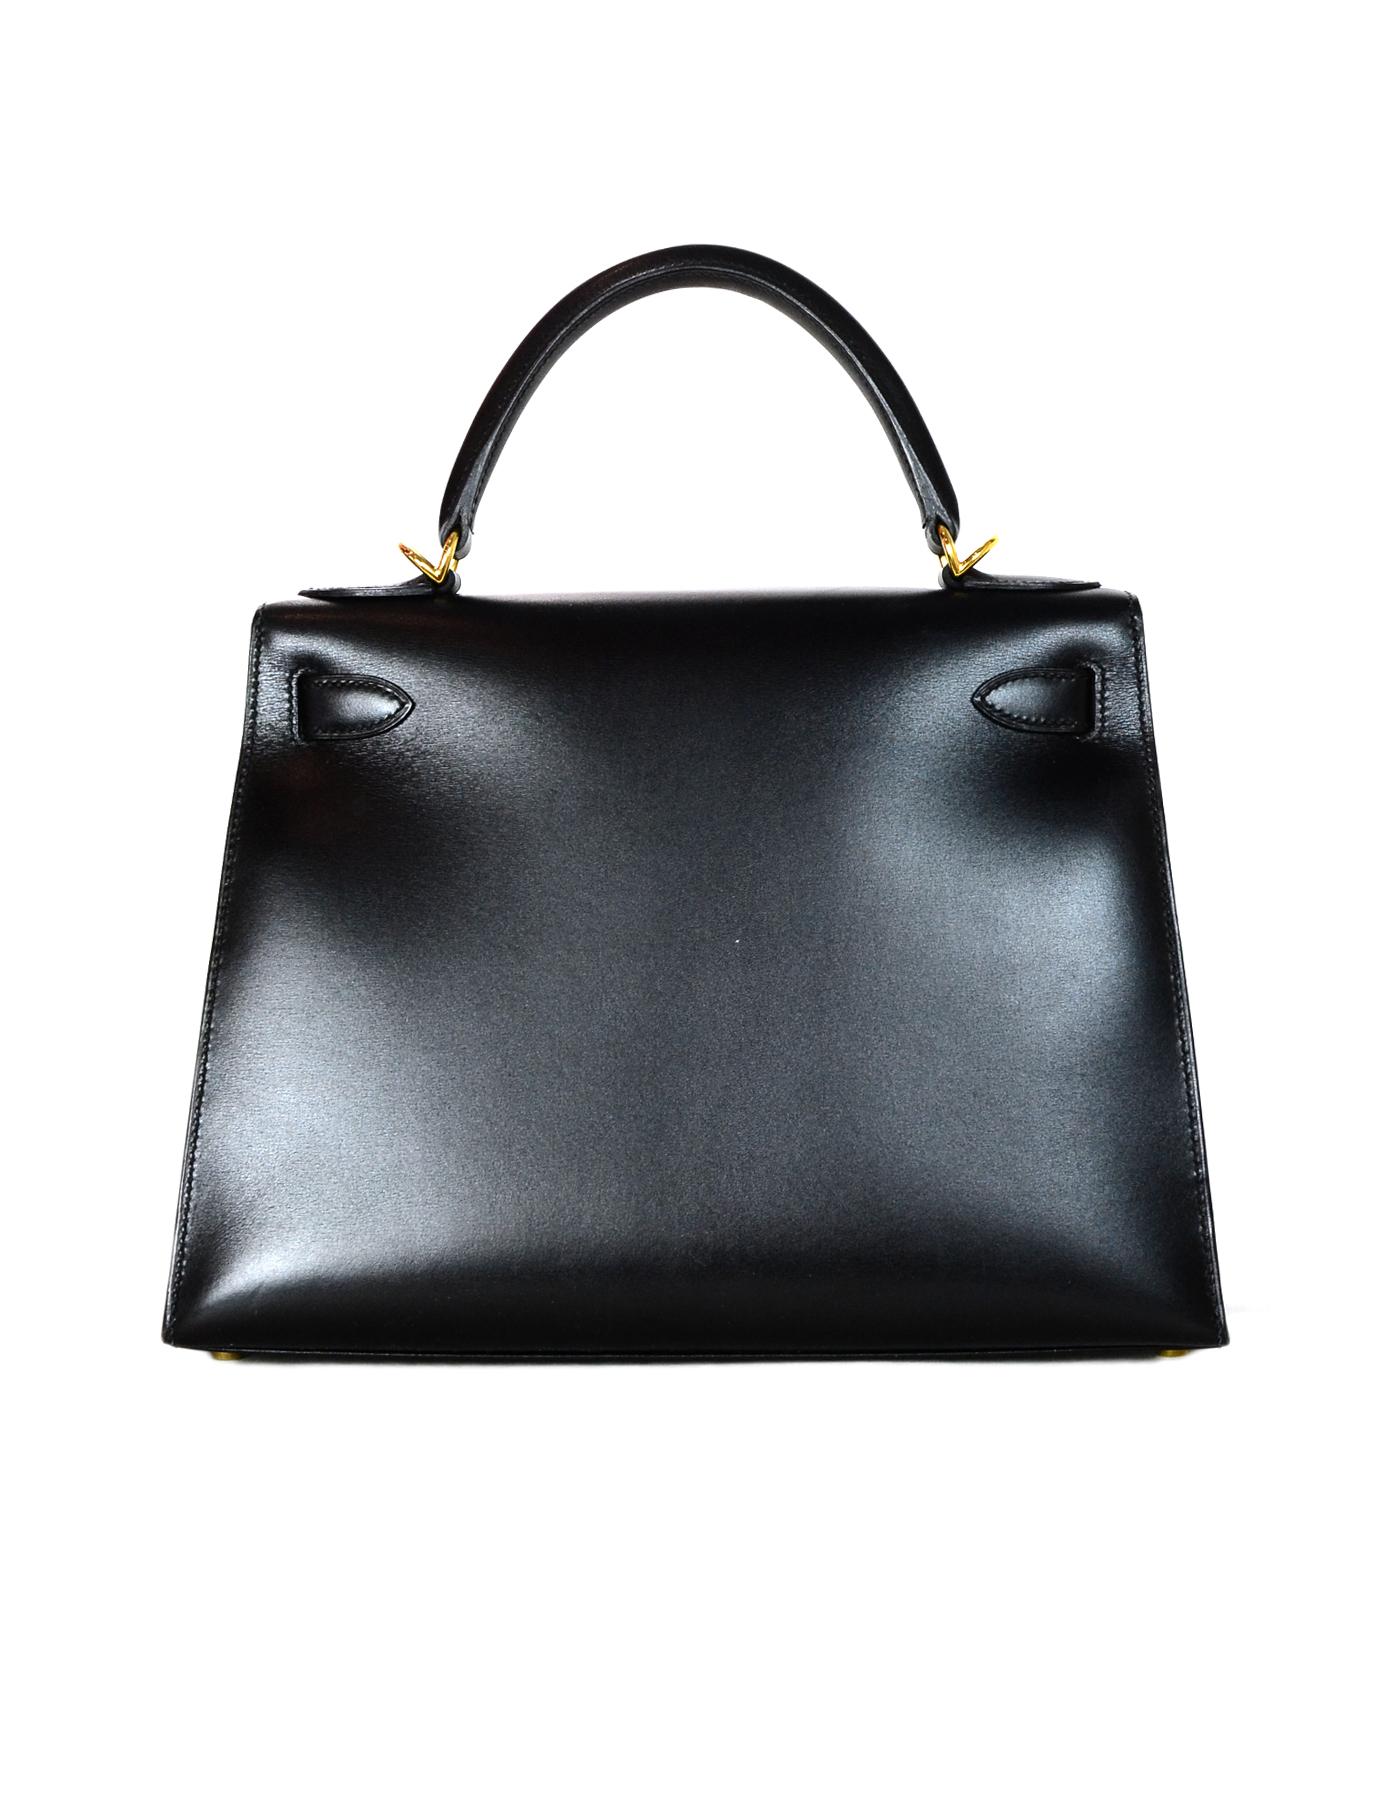 Hermes 2001 Black Box Leather 28cm Rigid Sellier Kelly Bag GHW In Excellent Condition In New York, NY